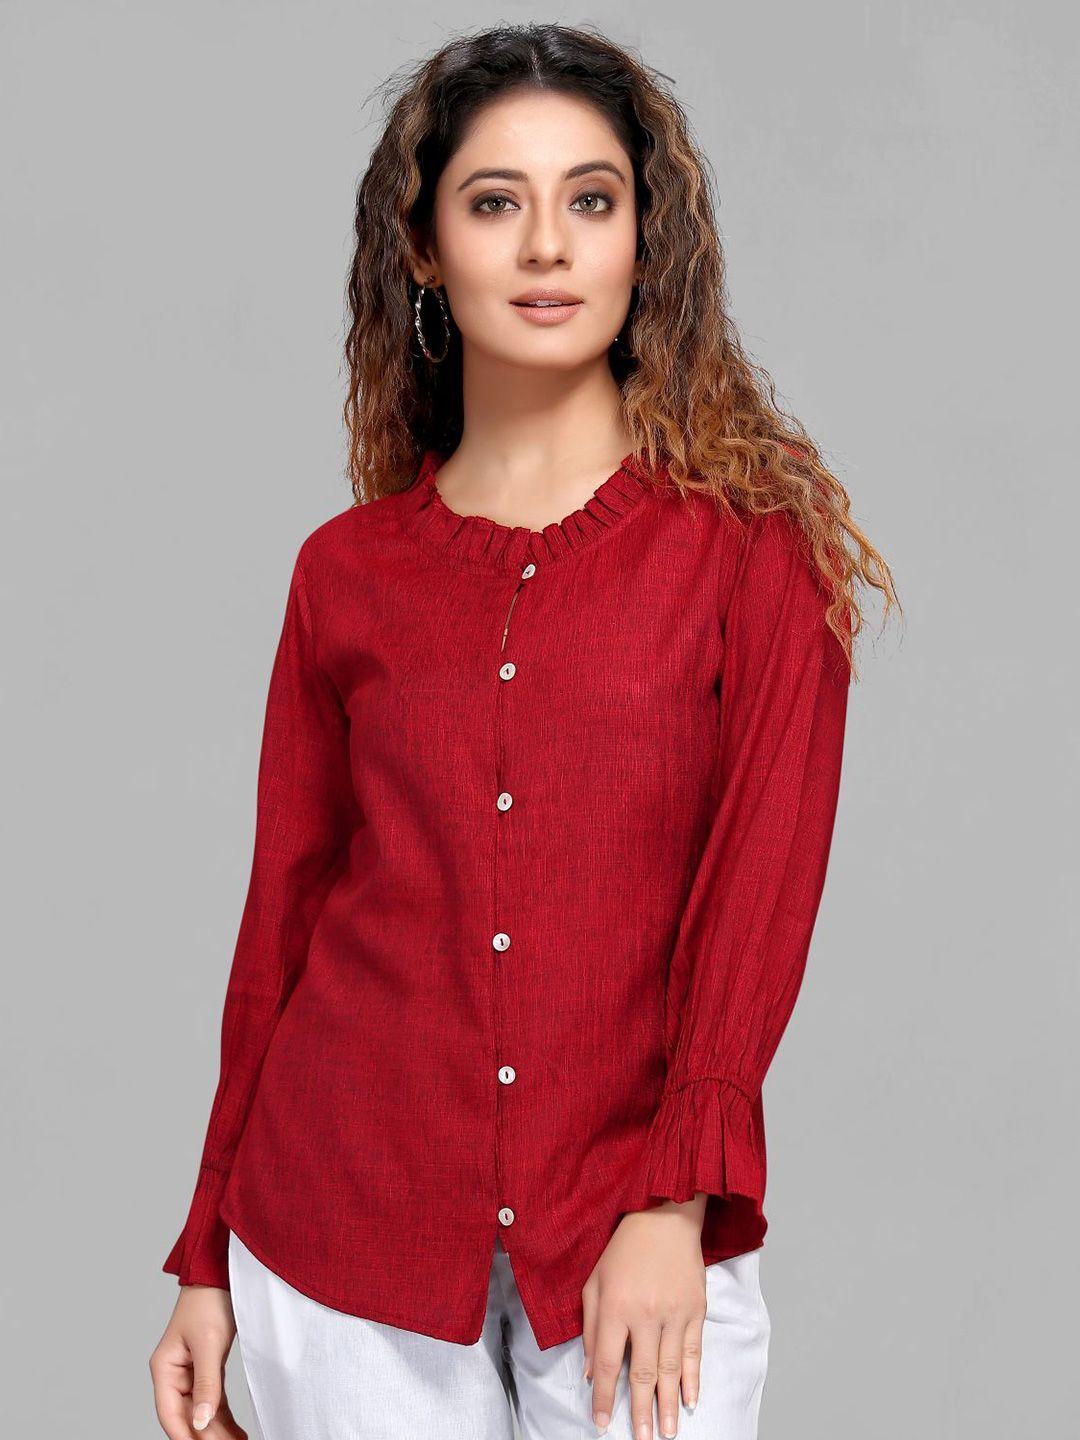 maiyee red shirt style top